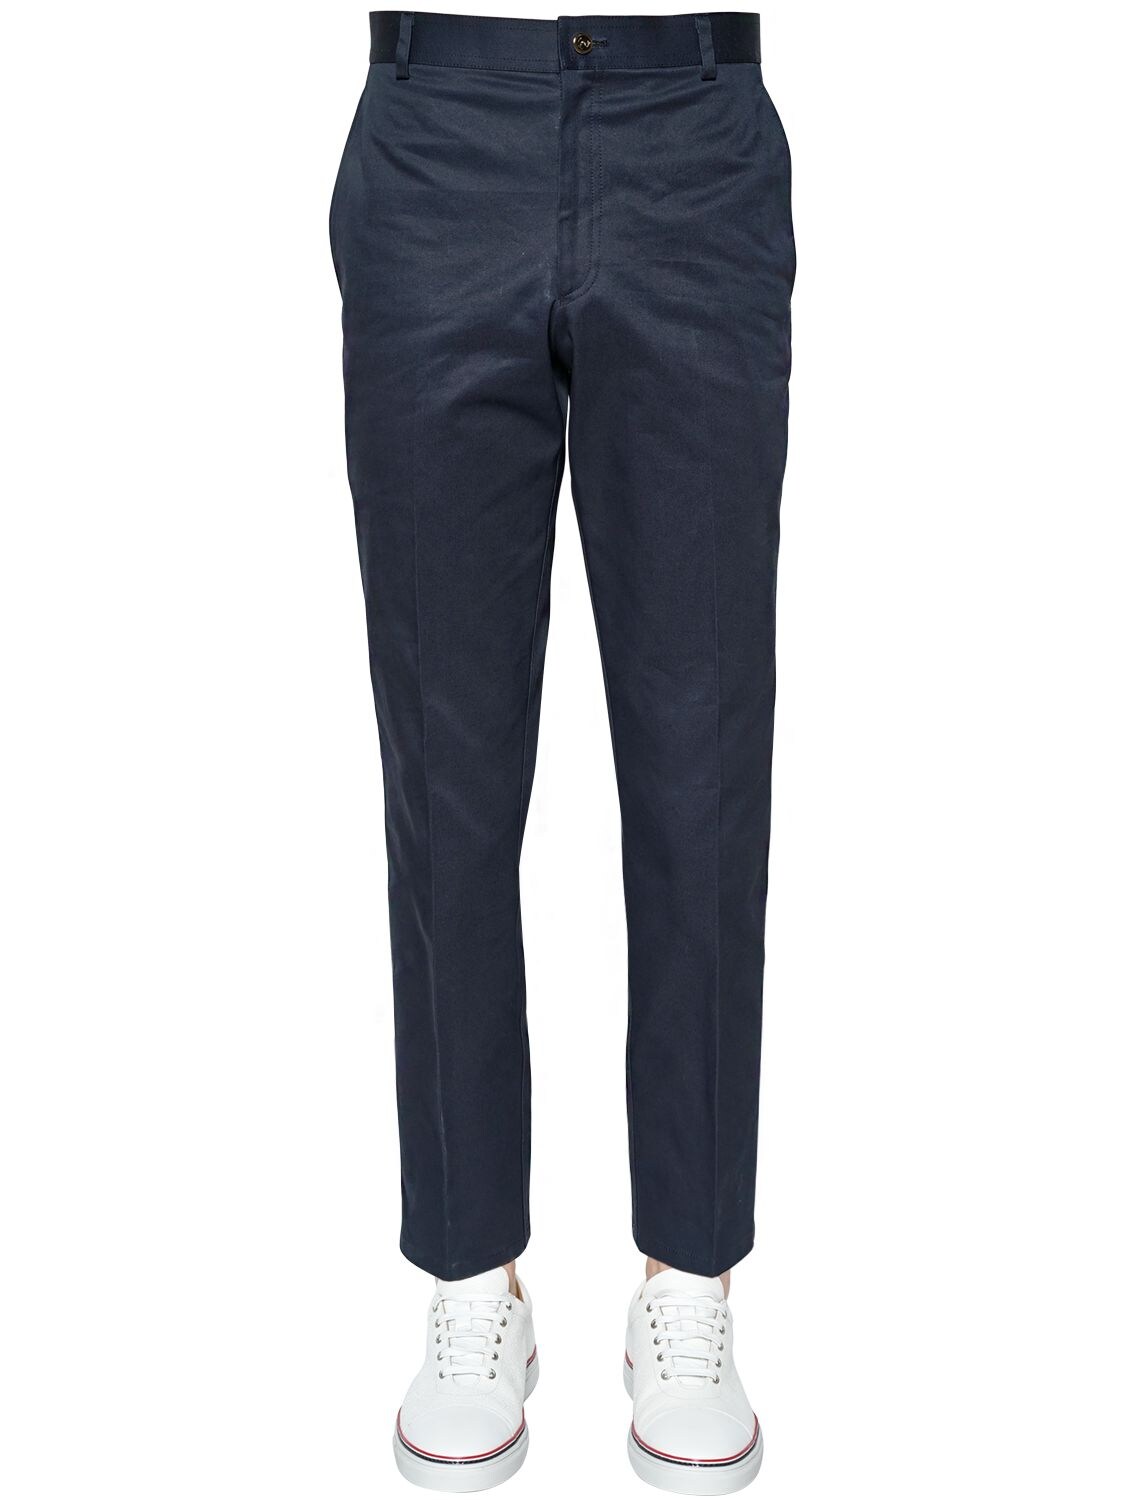 Thom Browne Light Cotton Twill Chino Pants In Navy